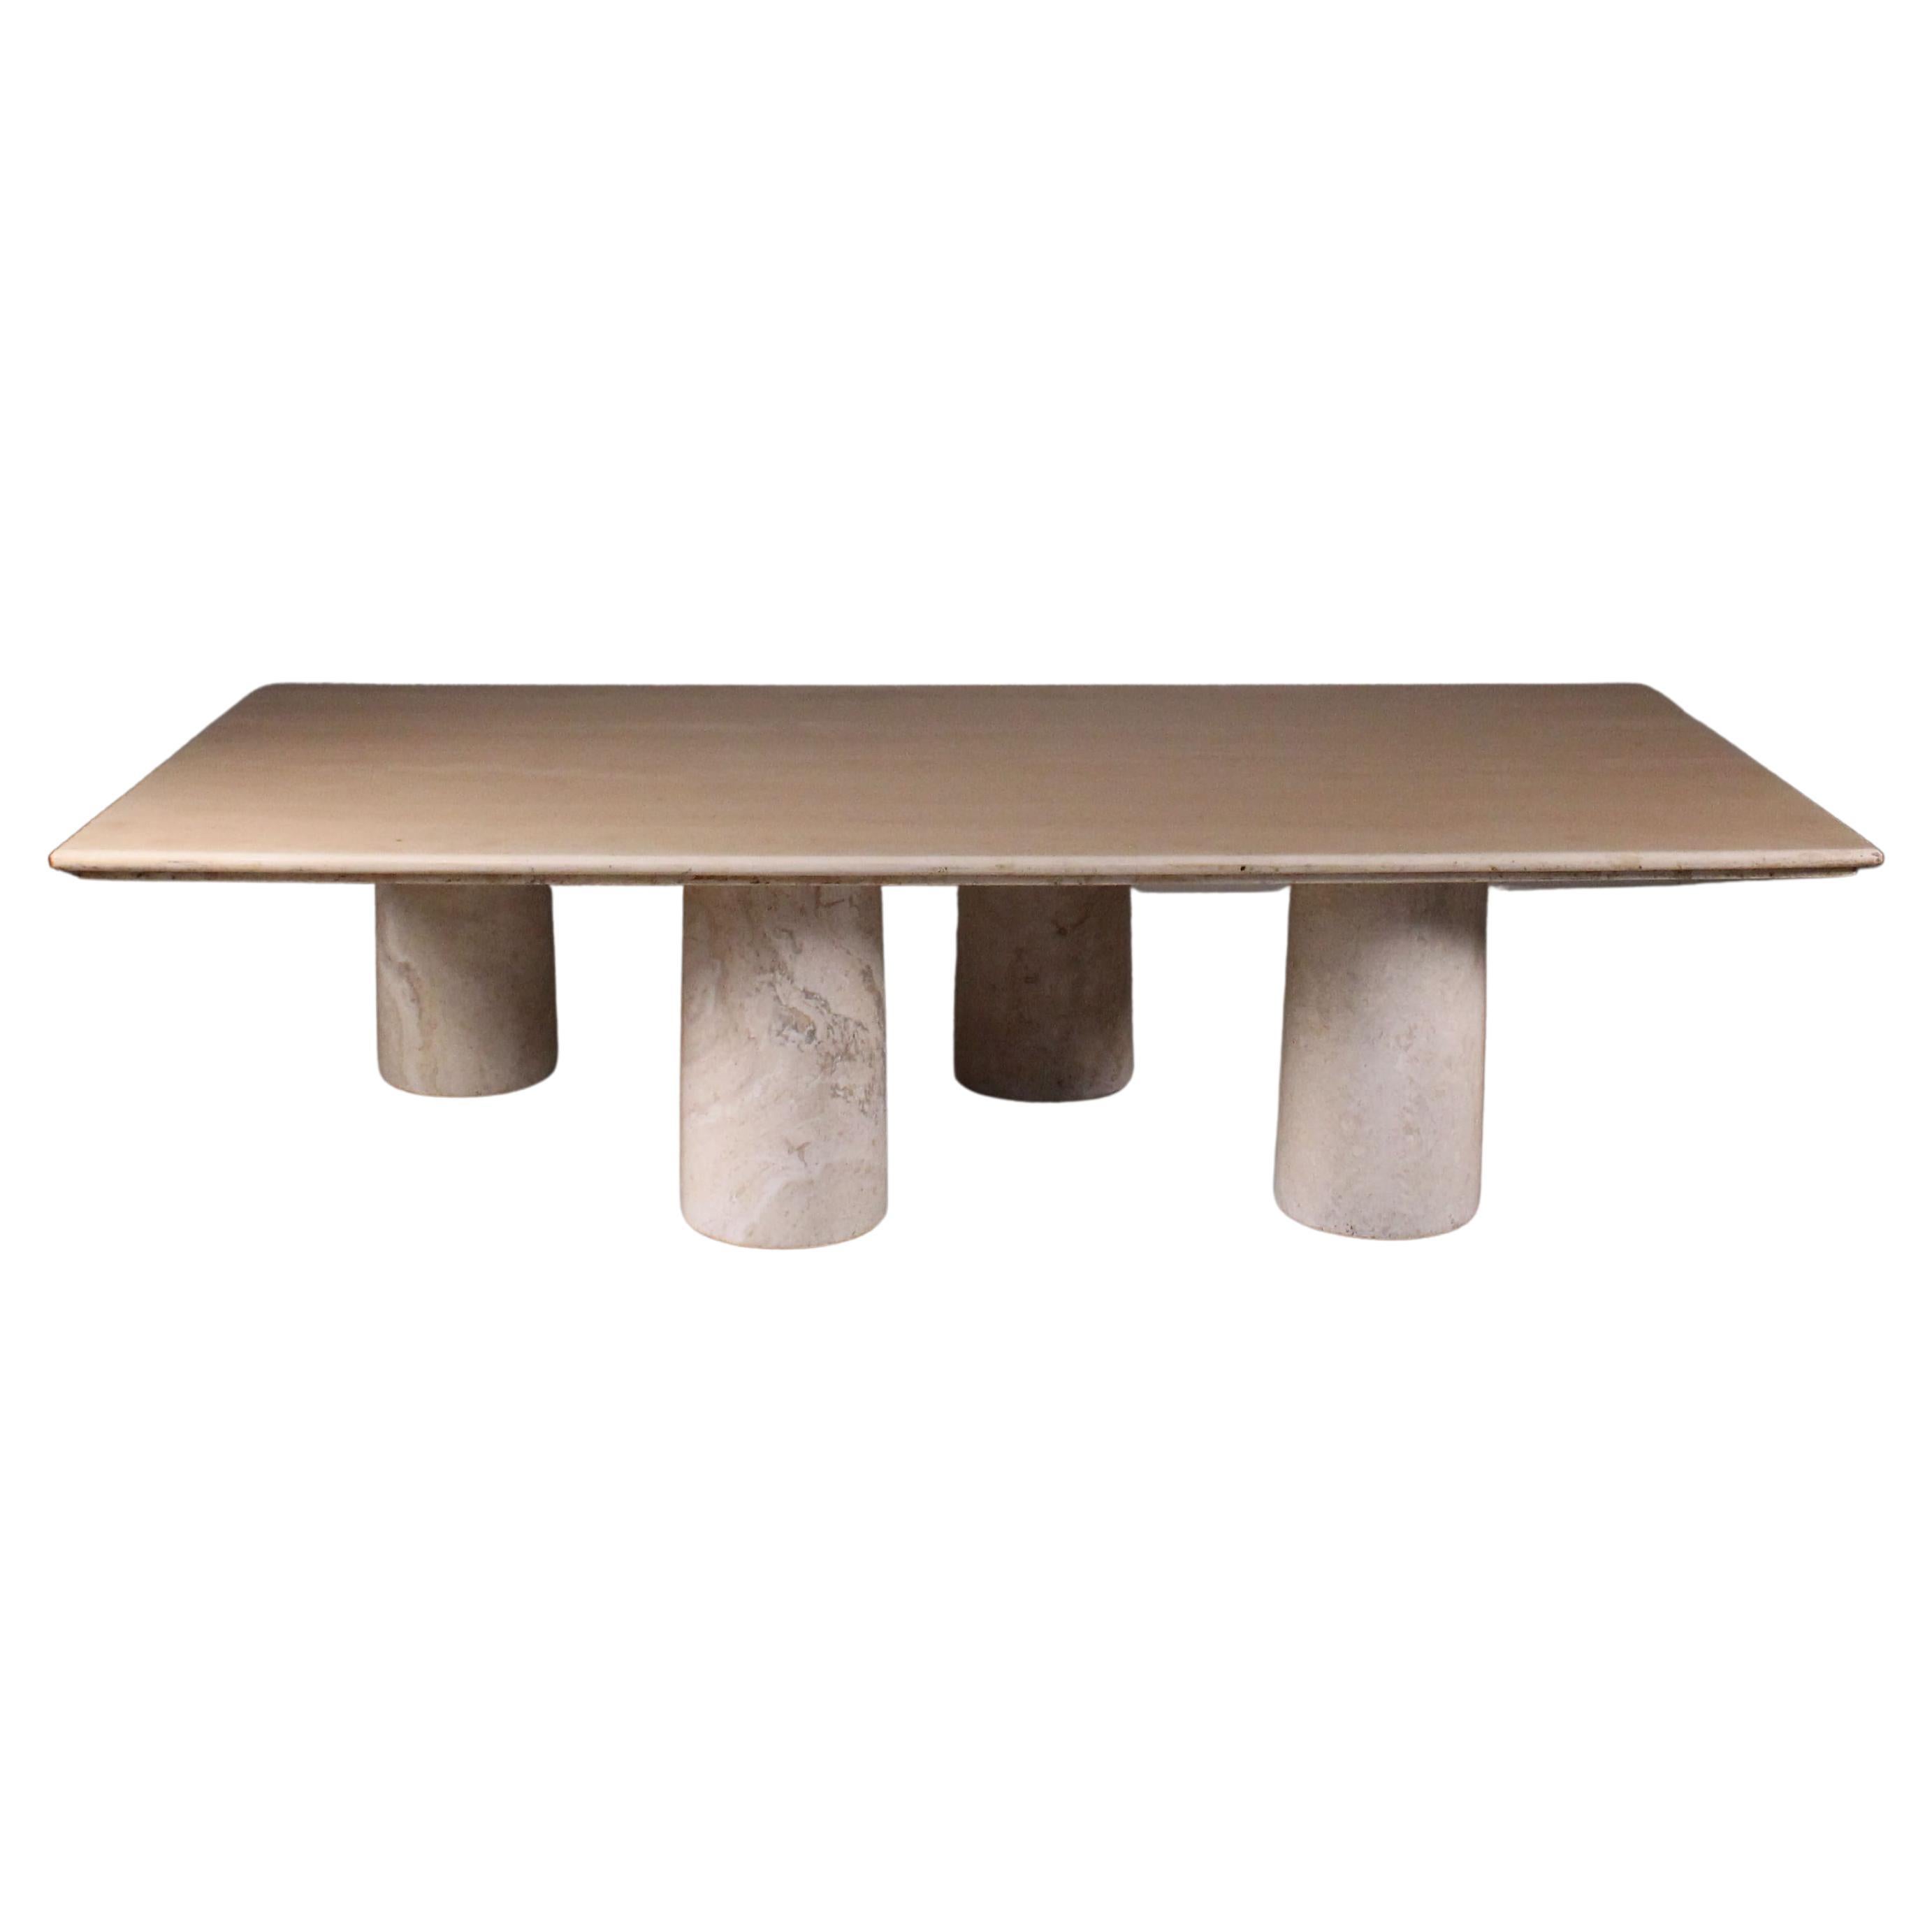  Colonnaded marble coffee table, Mario Bellini, Cassina, 1969 For Sale